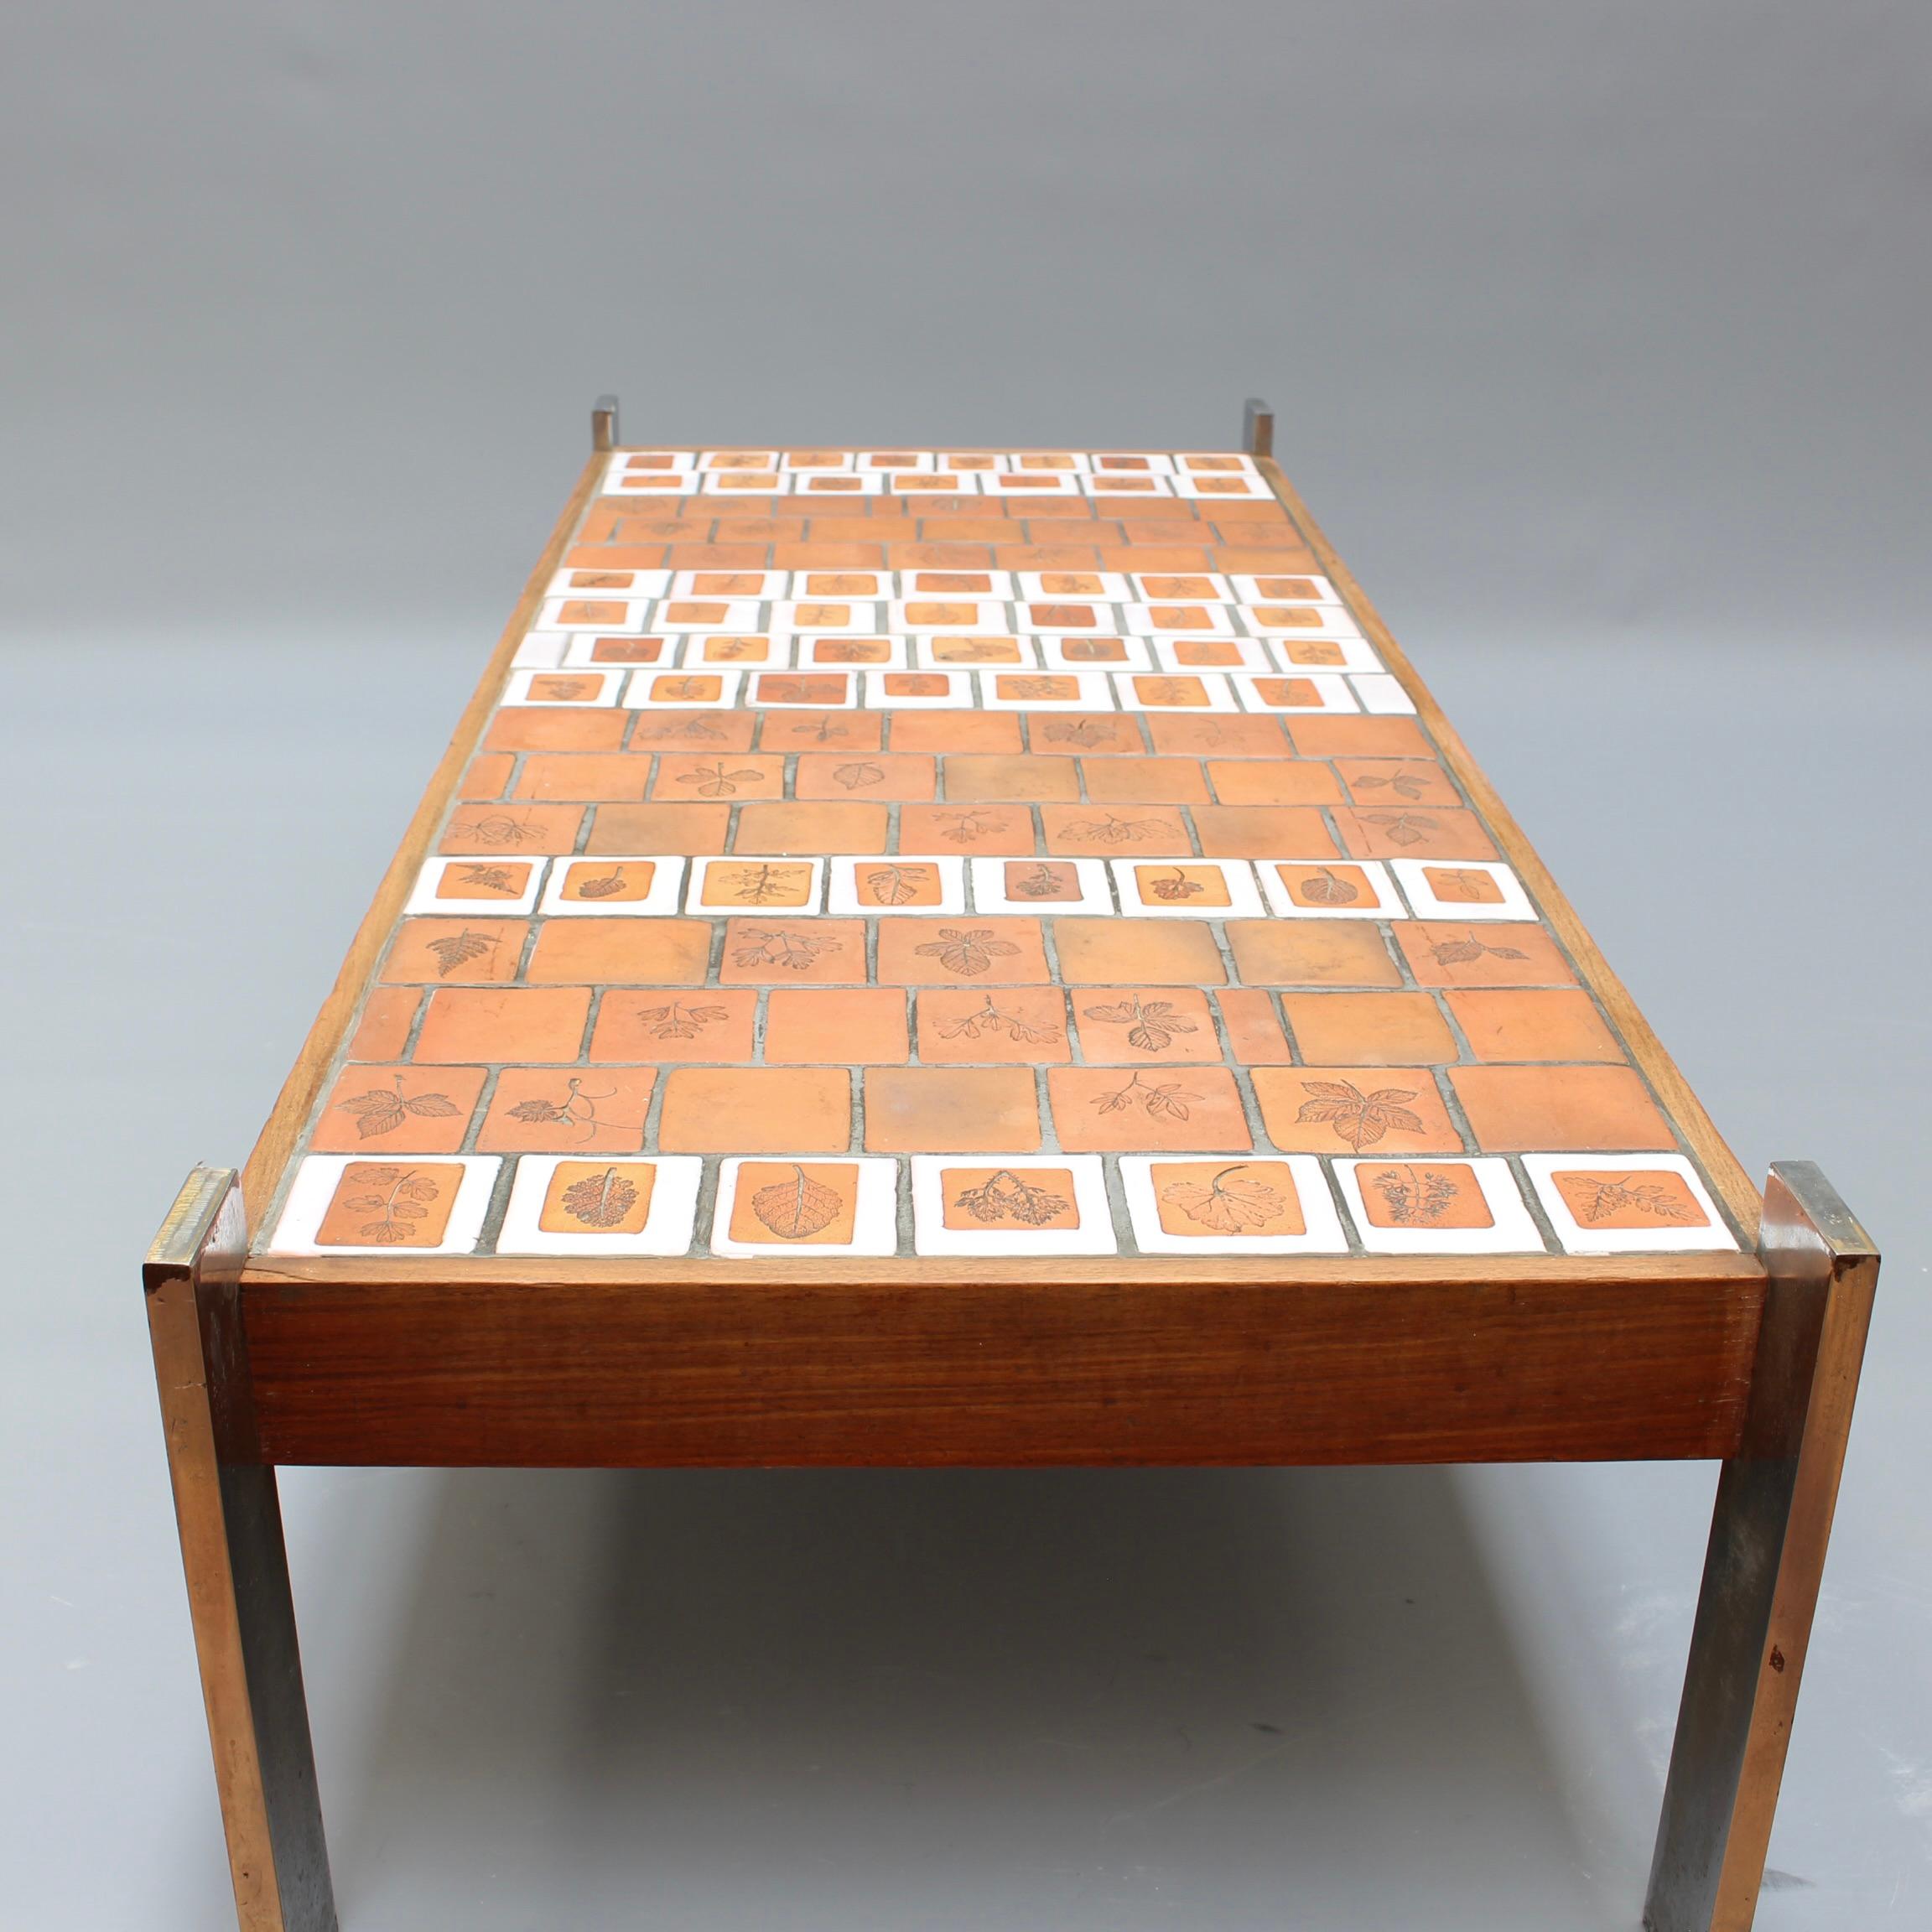 Vintage French Coffee Table with Leaf Motif Tiles by Roger Capron (circa 1970s) For Sale 4